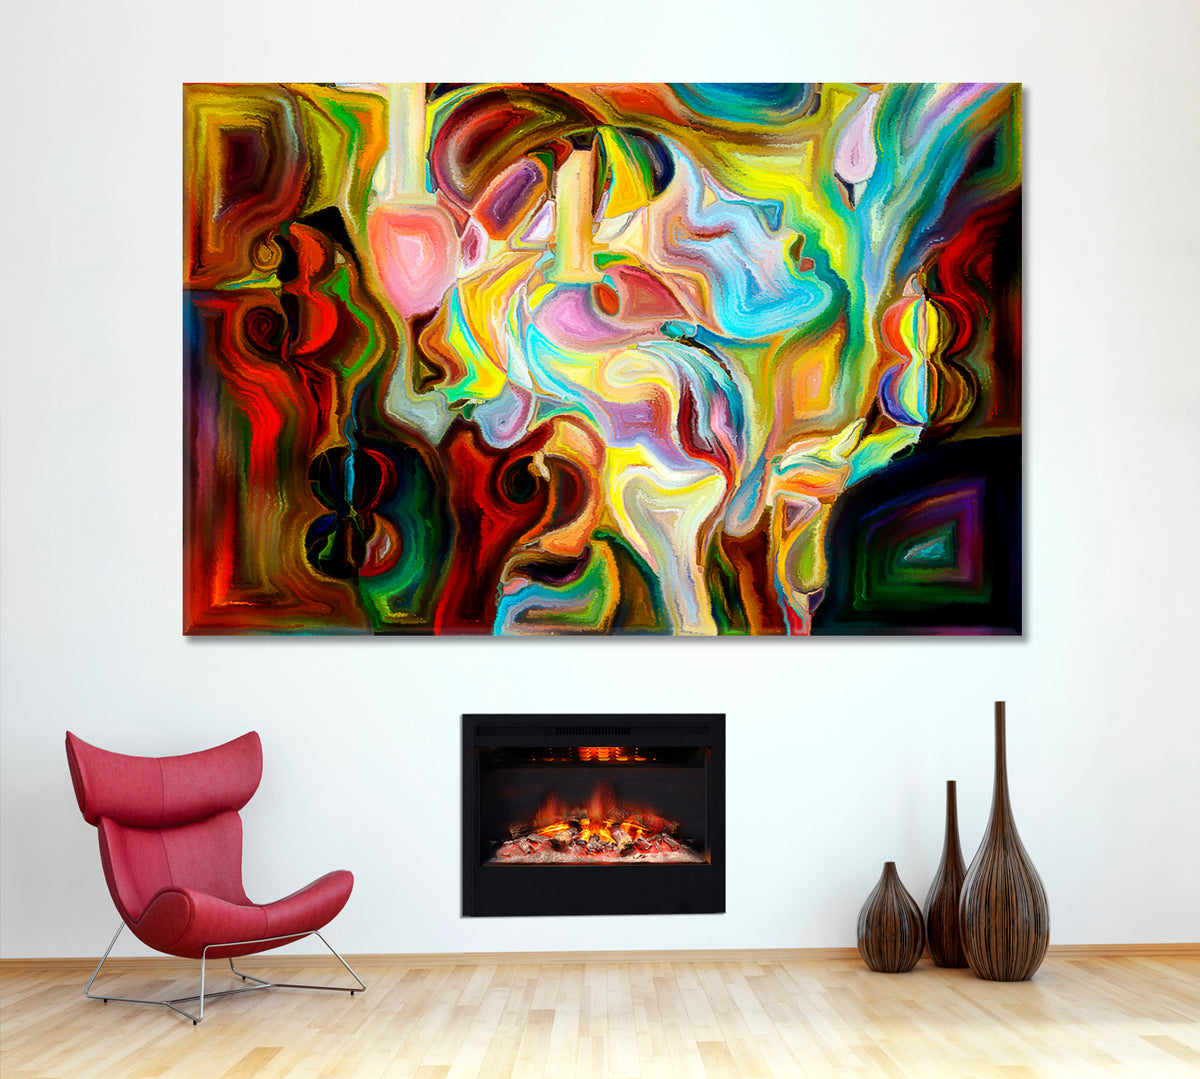 MULTIFACETED CONSCIOUSNESS Human and Numbers Abstract Art Print Artesty 1 panel 24" x 16" 